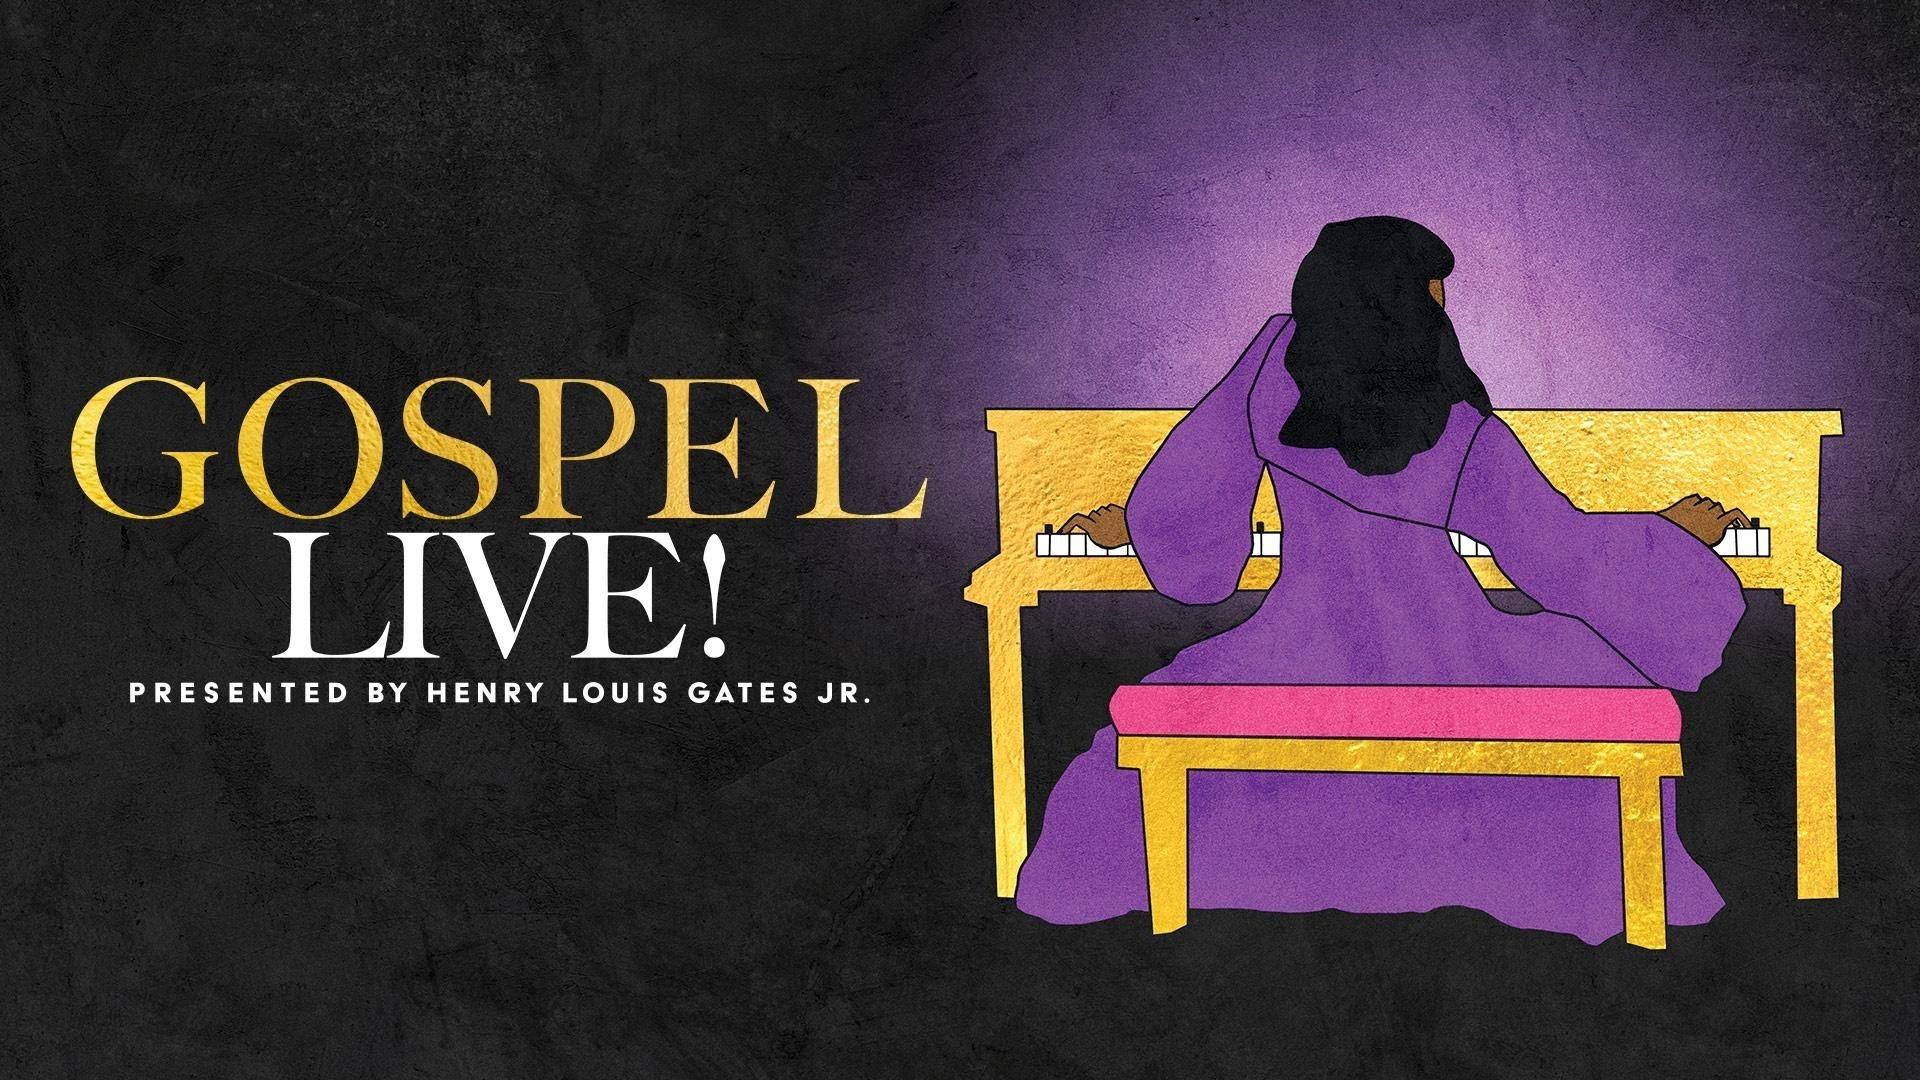 Gospel Live! Presented by Henry Louis Gates Jr. next to a graphic of a black woman in a purple robe playing at a piano.